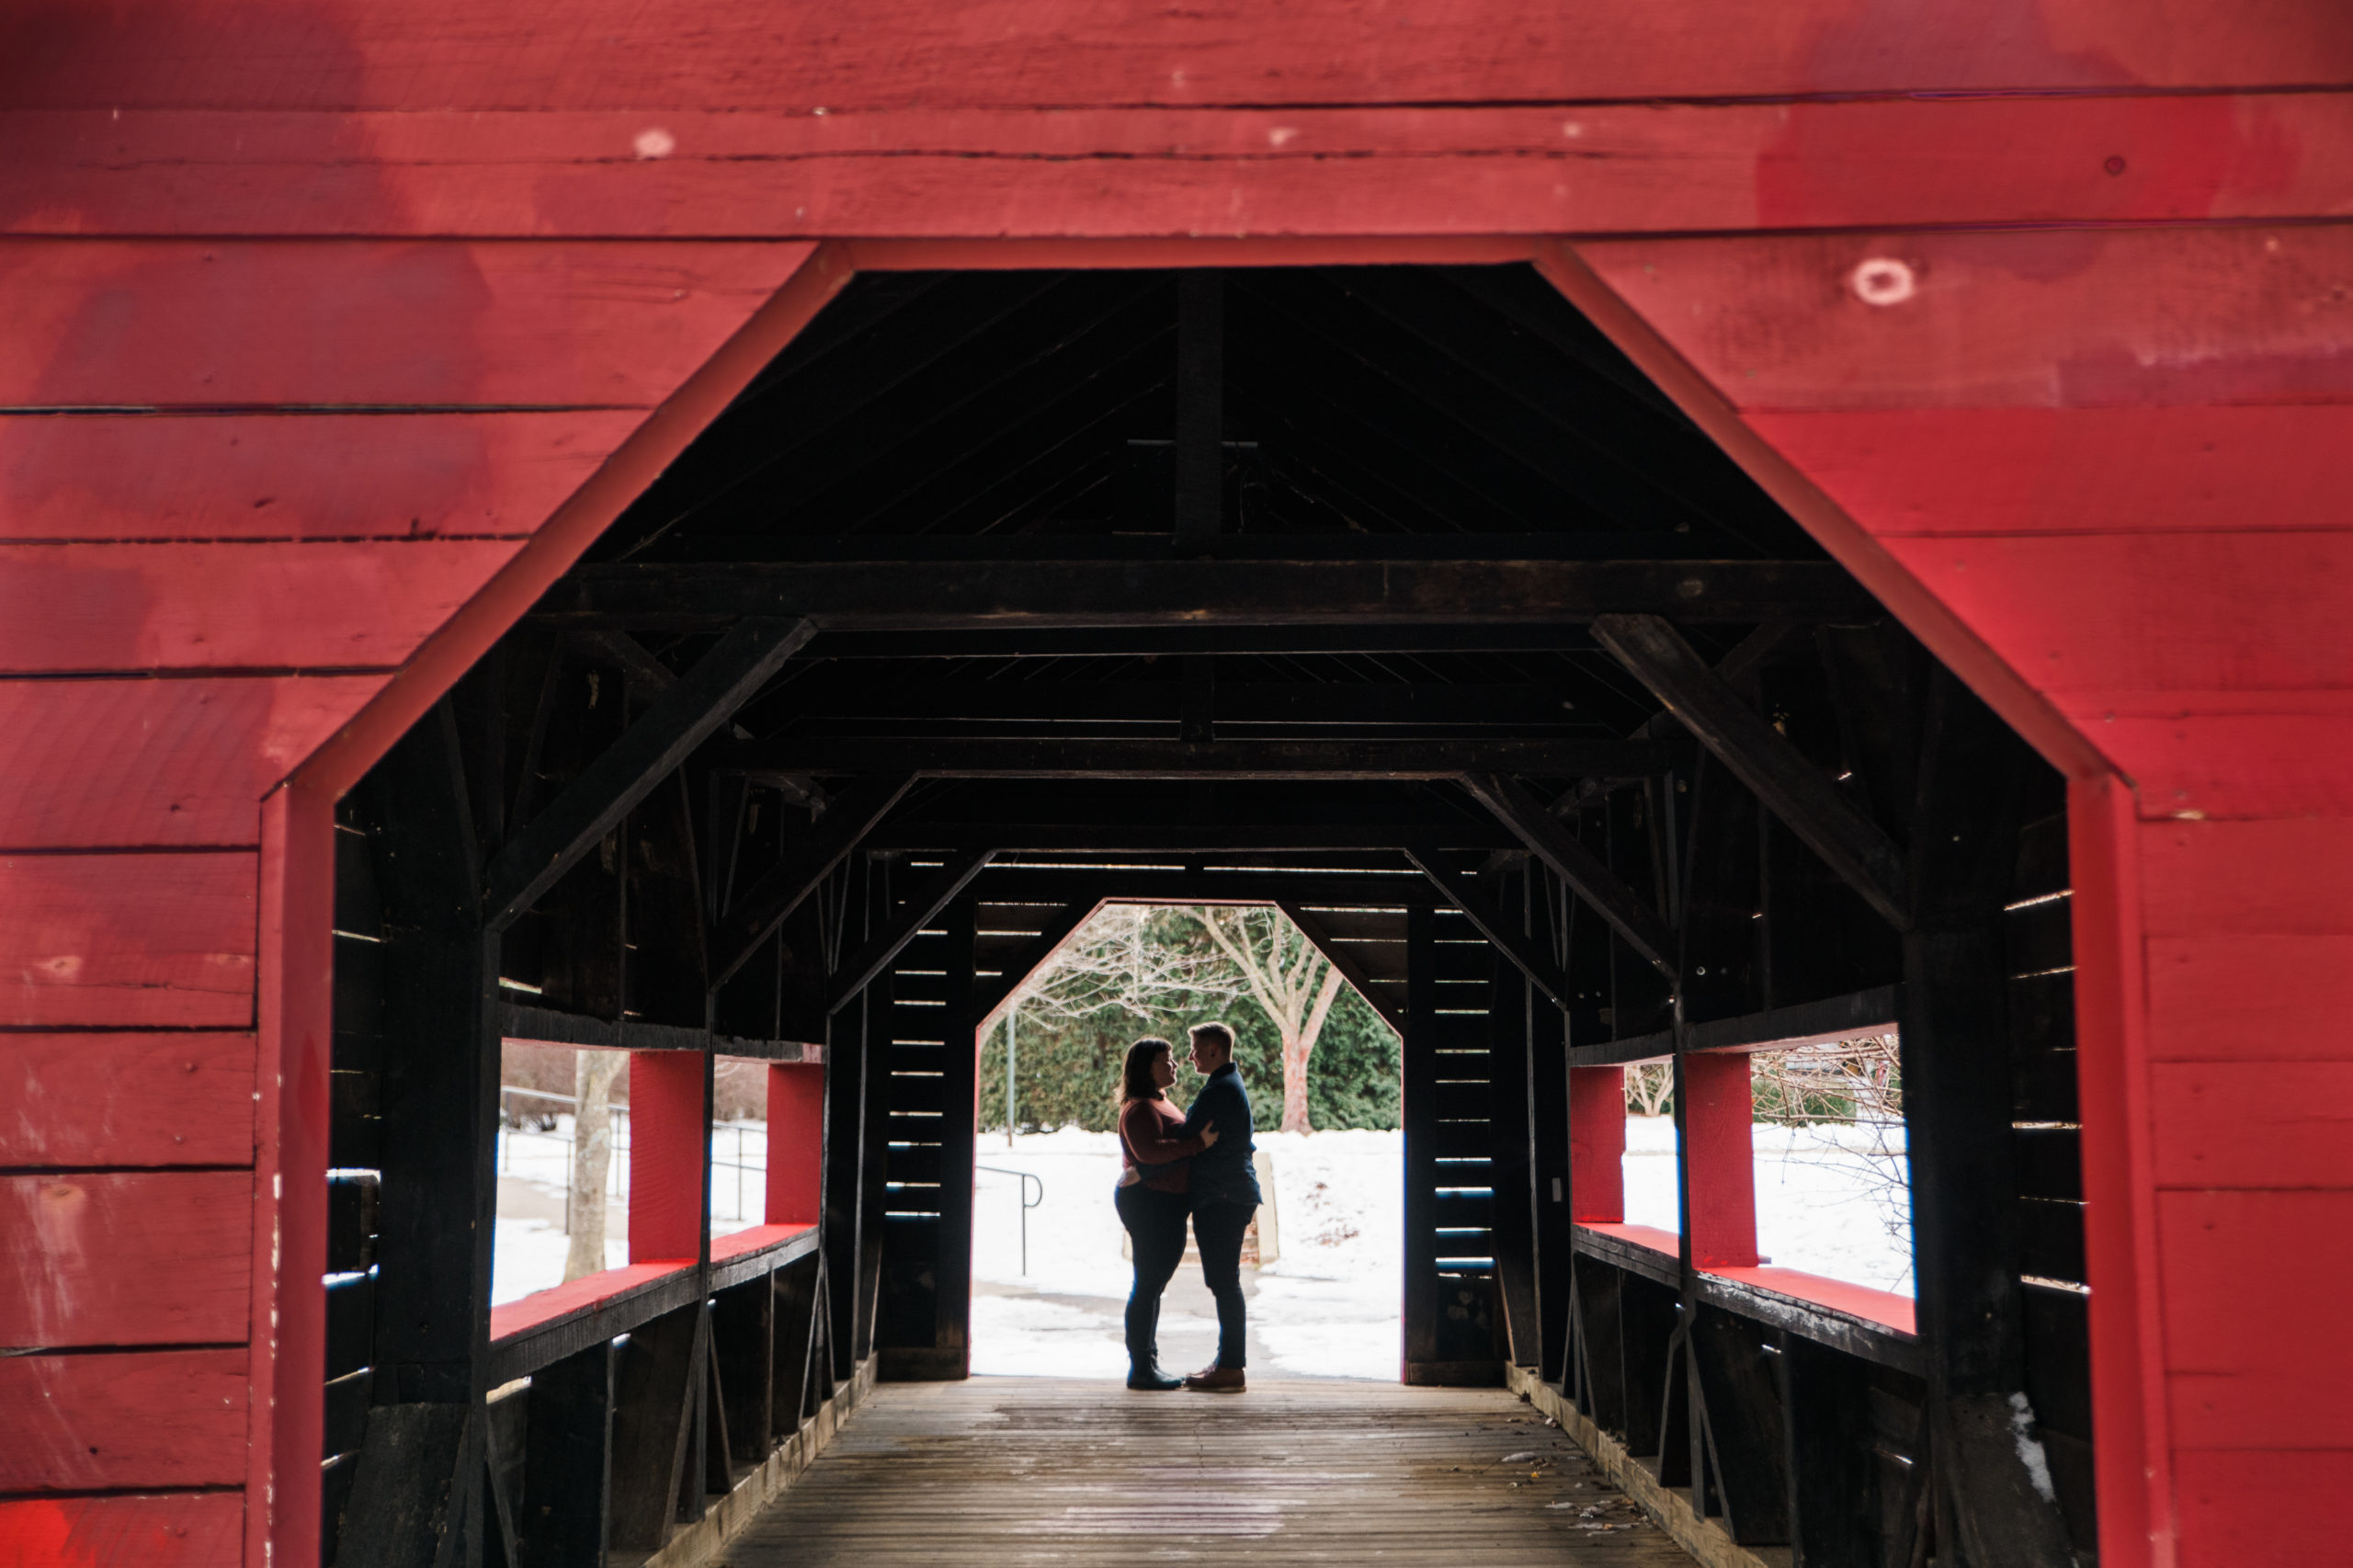 A couple standing and facing each other in a red covered bridge